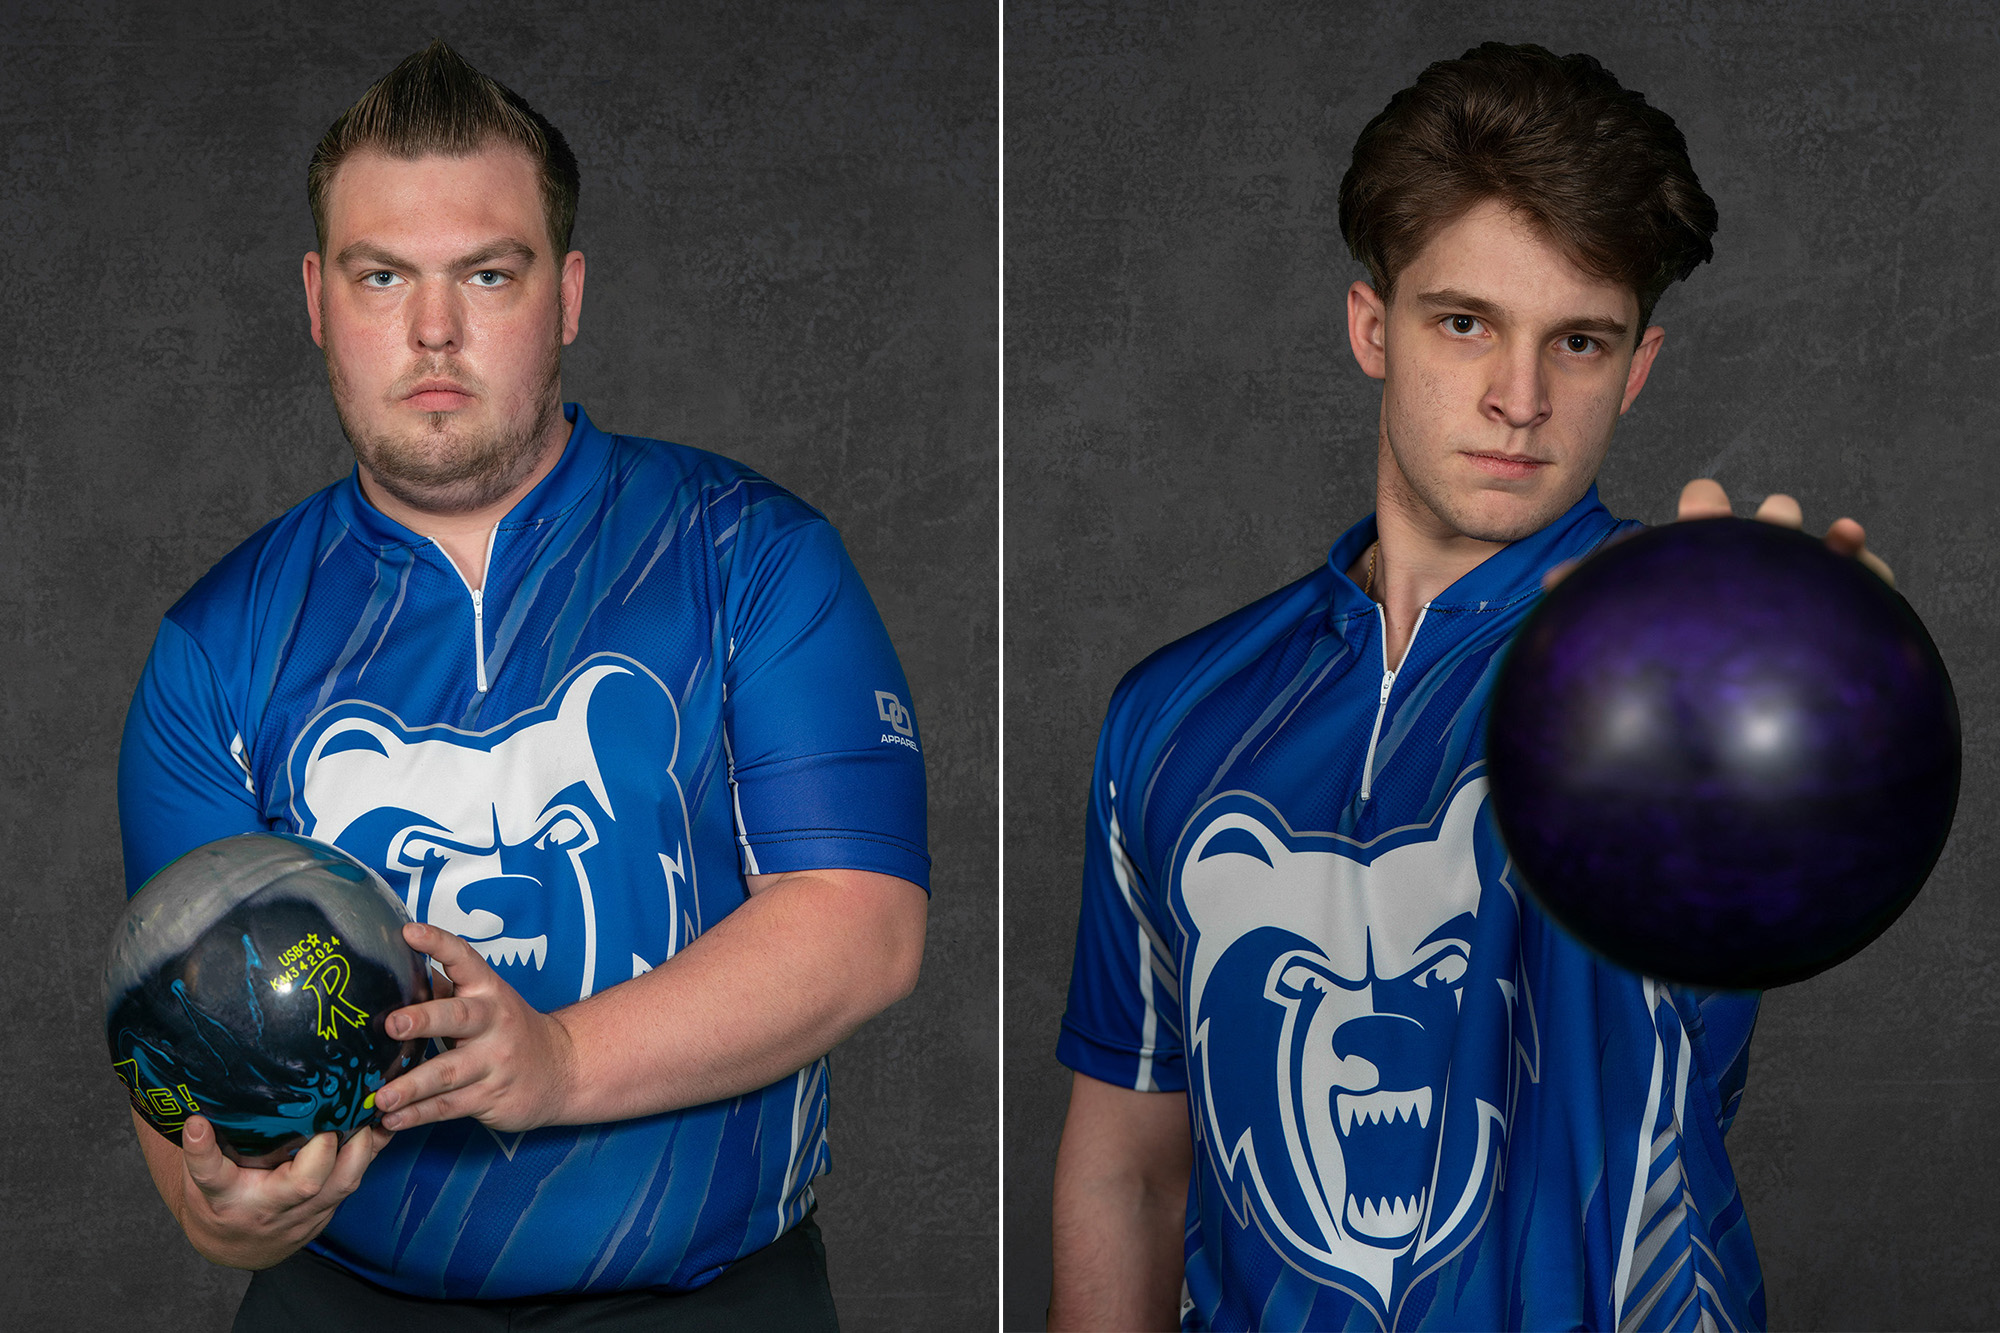 Men's bowlers Jacob O'Donnell and Bryan Foote